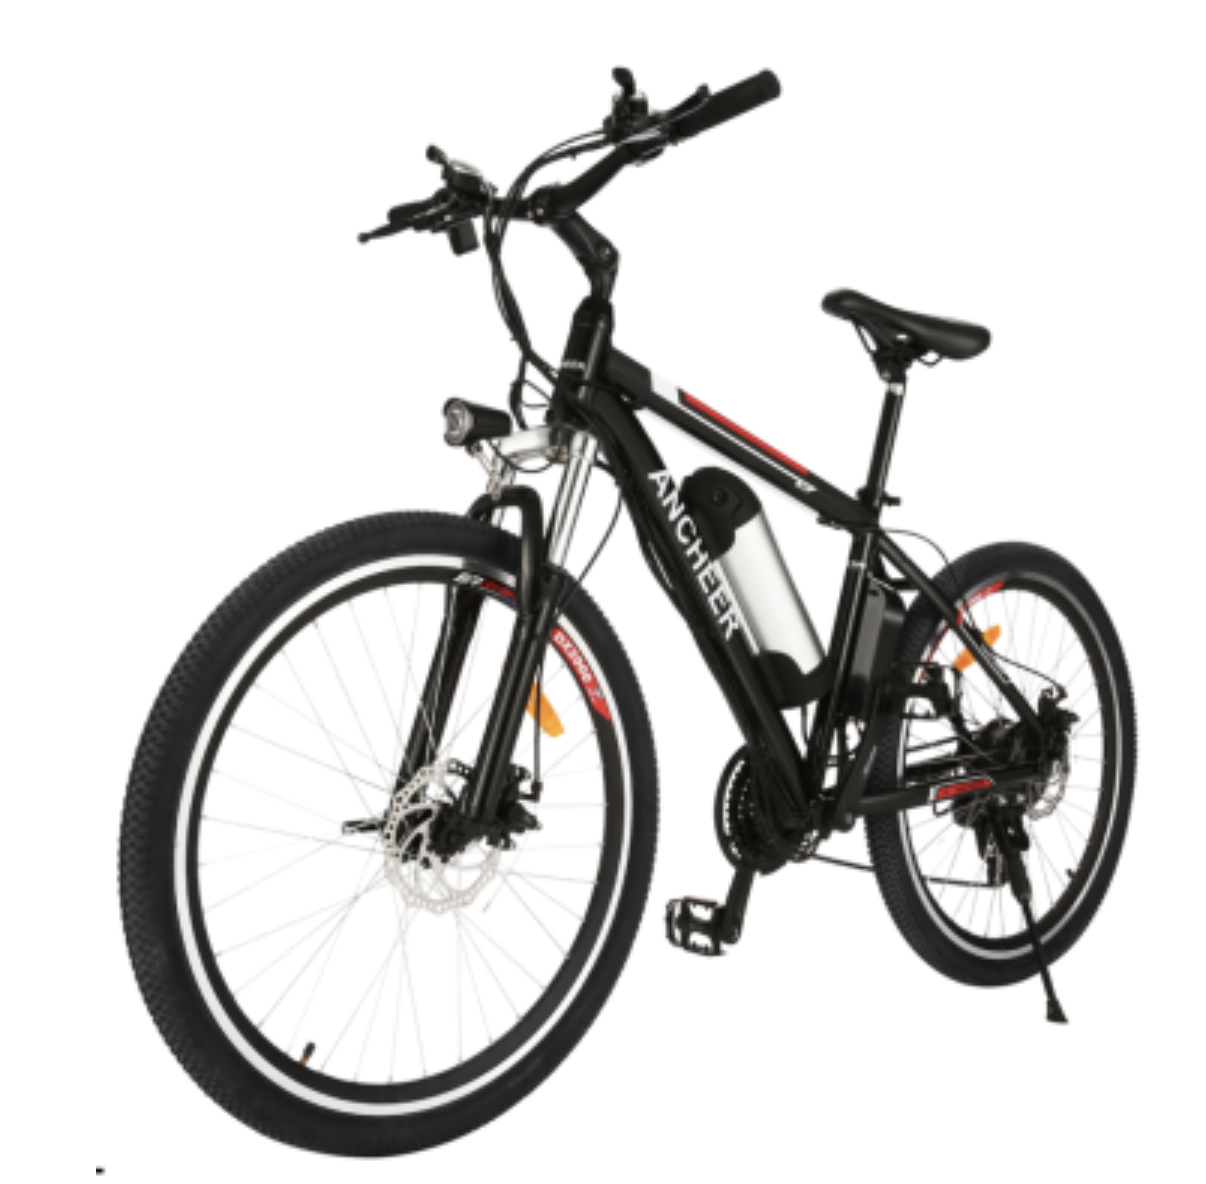 Recalled Ancheer e-bike with water bottle shaped cylindrical battery